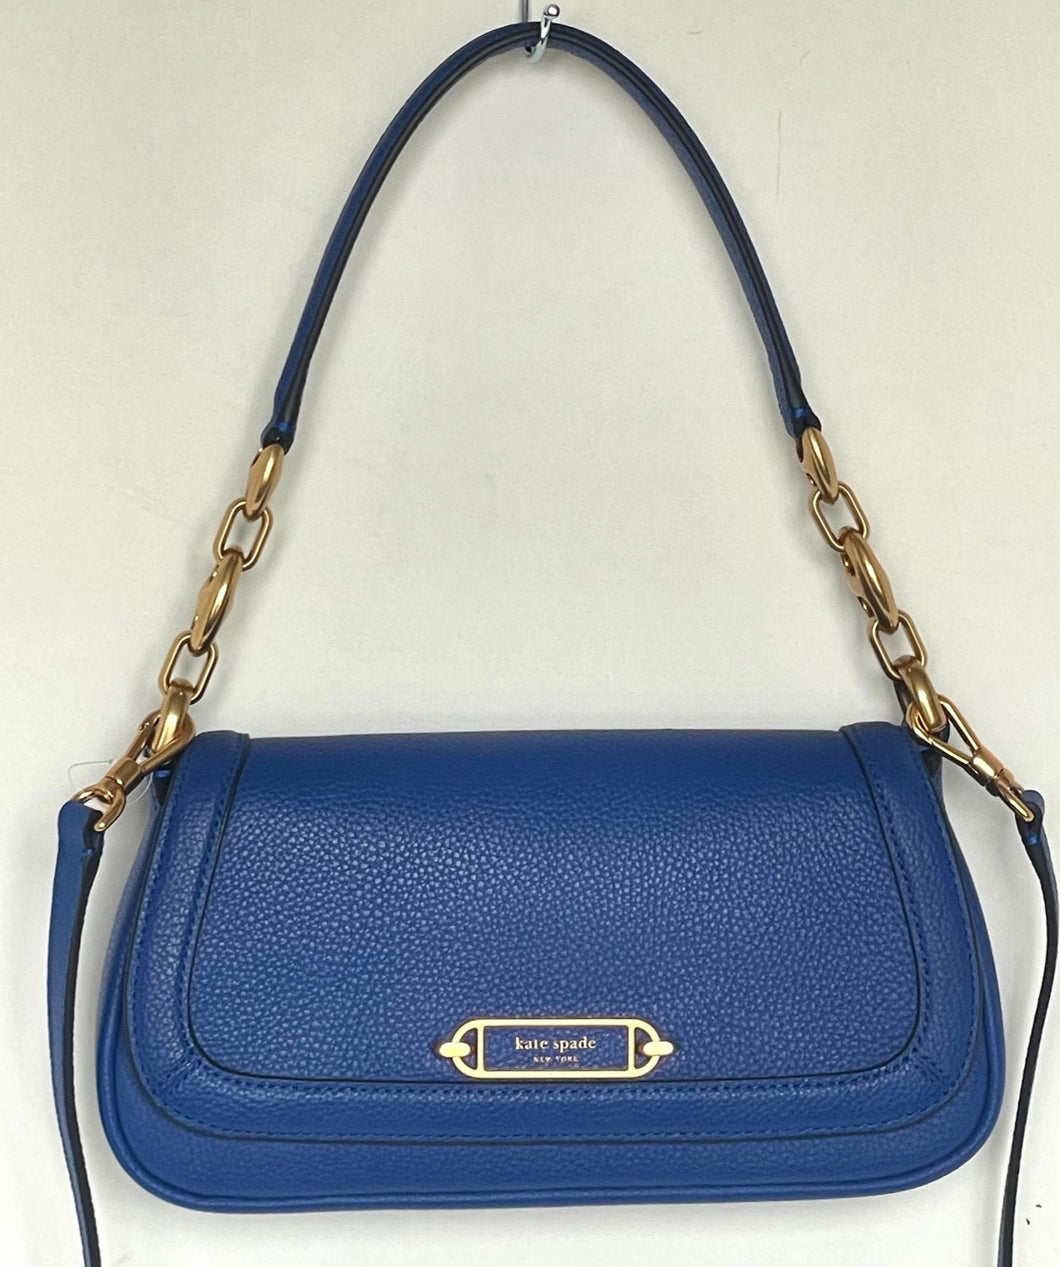 Kate Spade Gramercy Small Flap Shoulder Bag Blueberry Leather Crossbody Chain